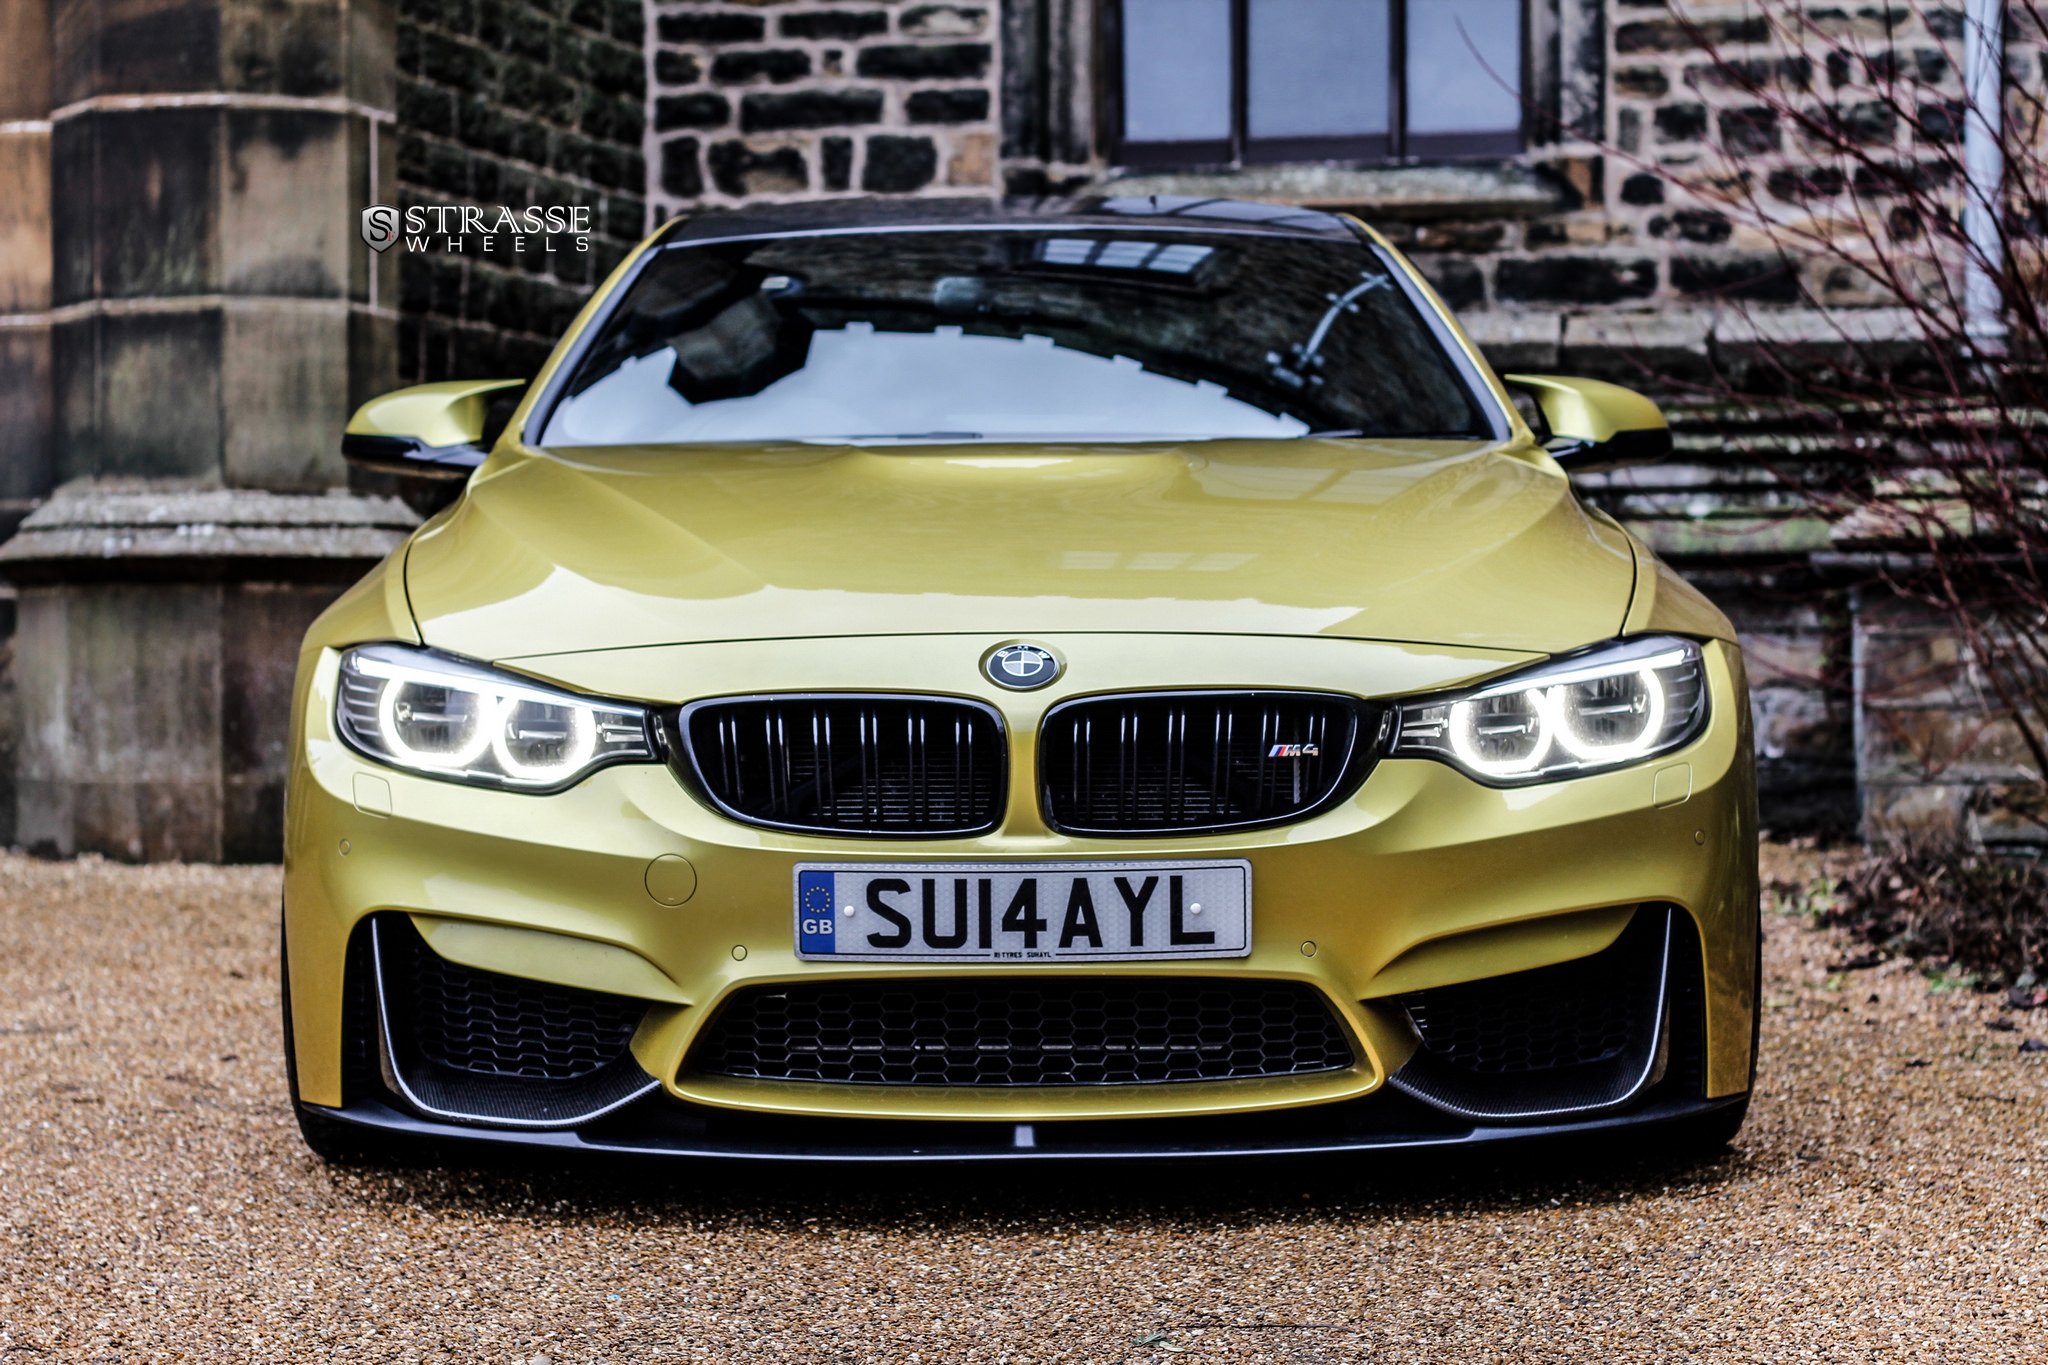 strasse, Wheels, Bmw m4, Coupe, Cars Wallpaper